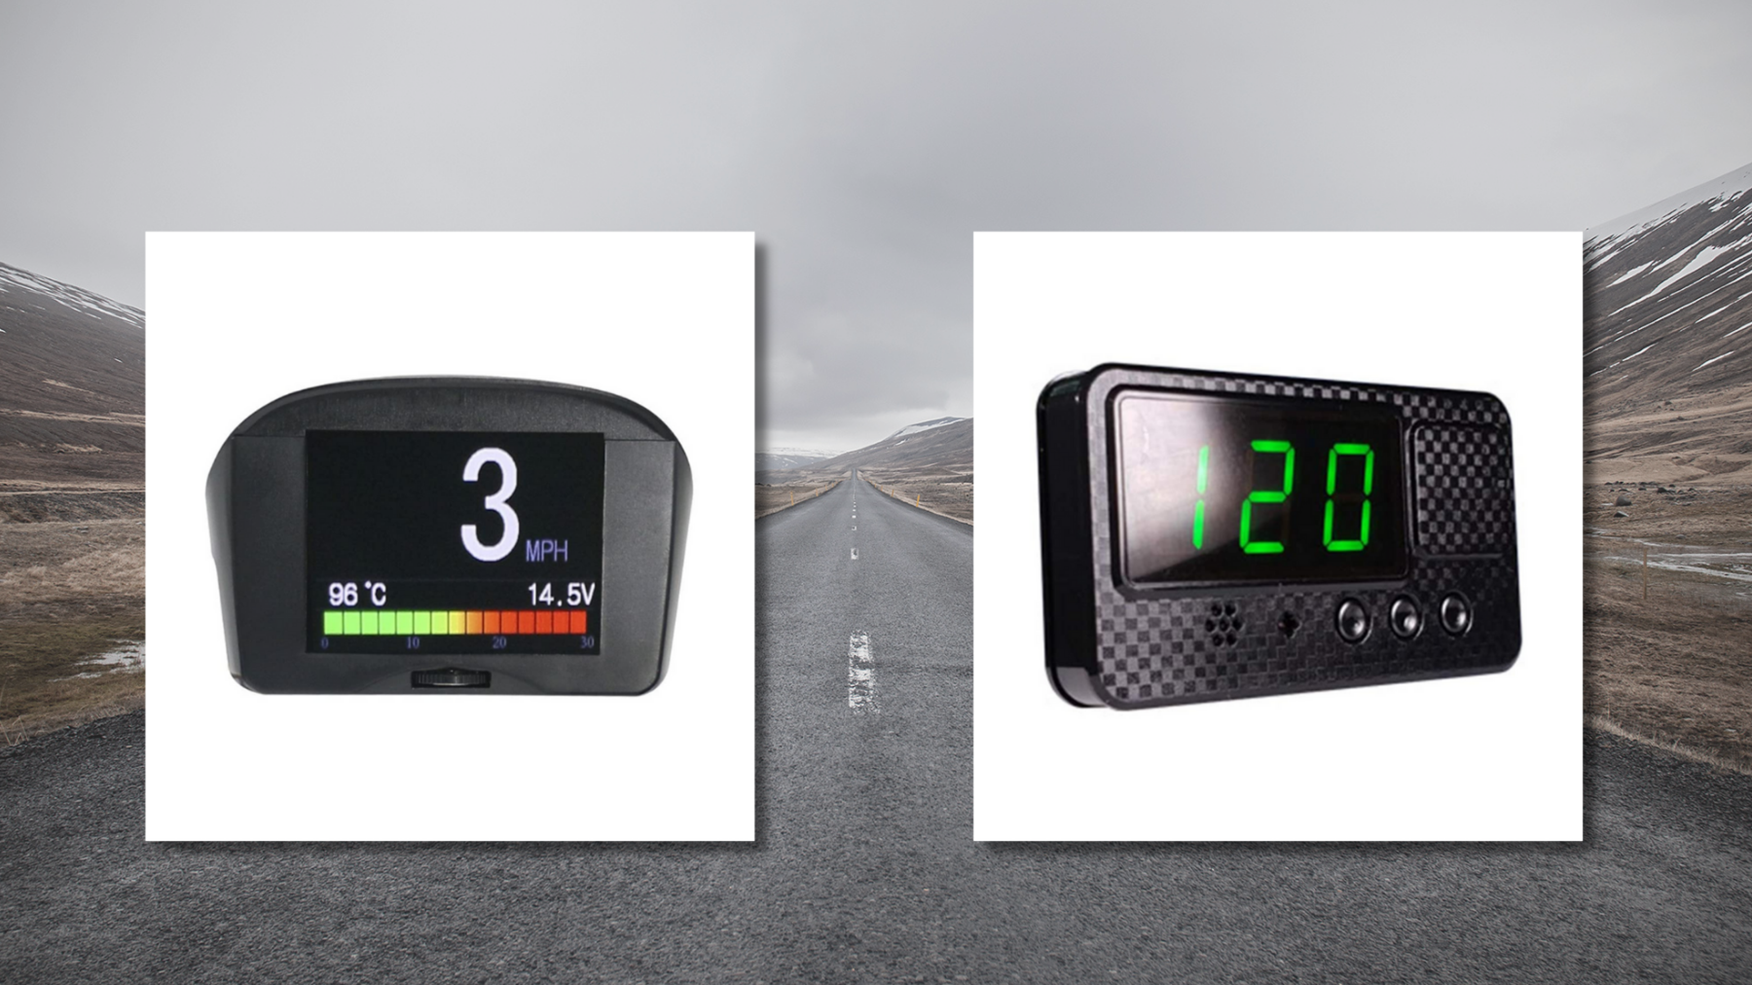 The Best Car Head-Up Displays